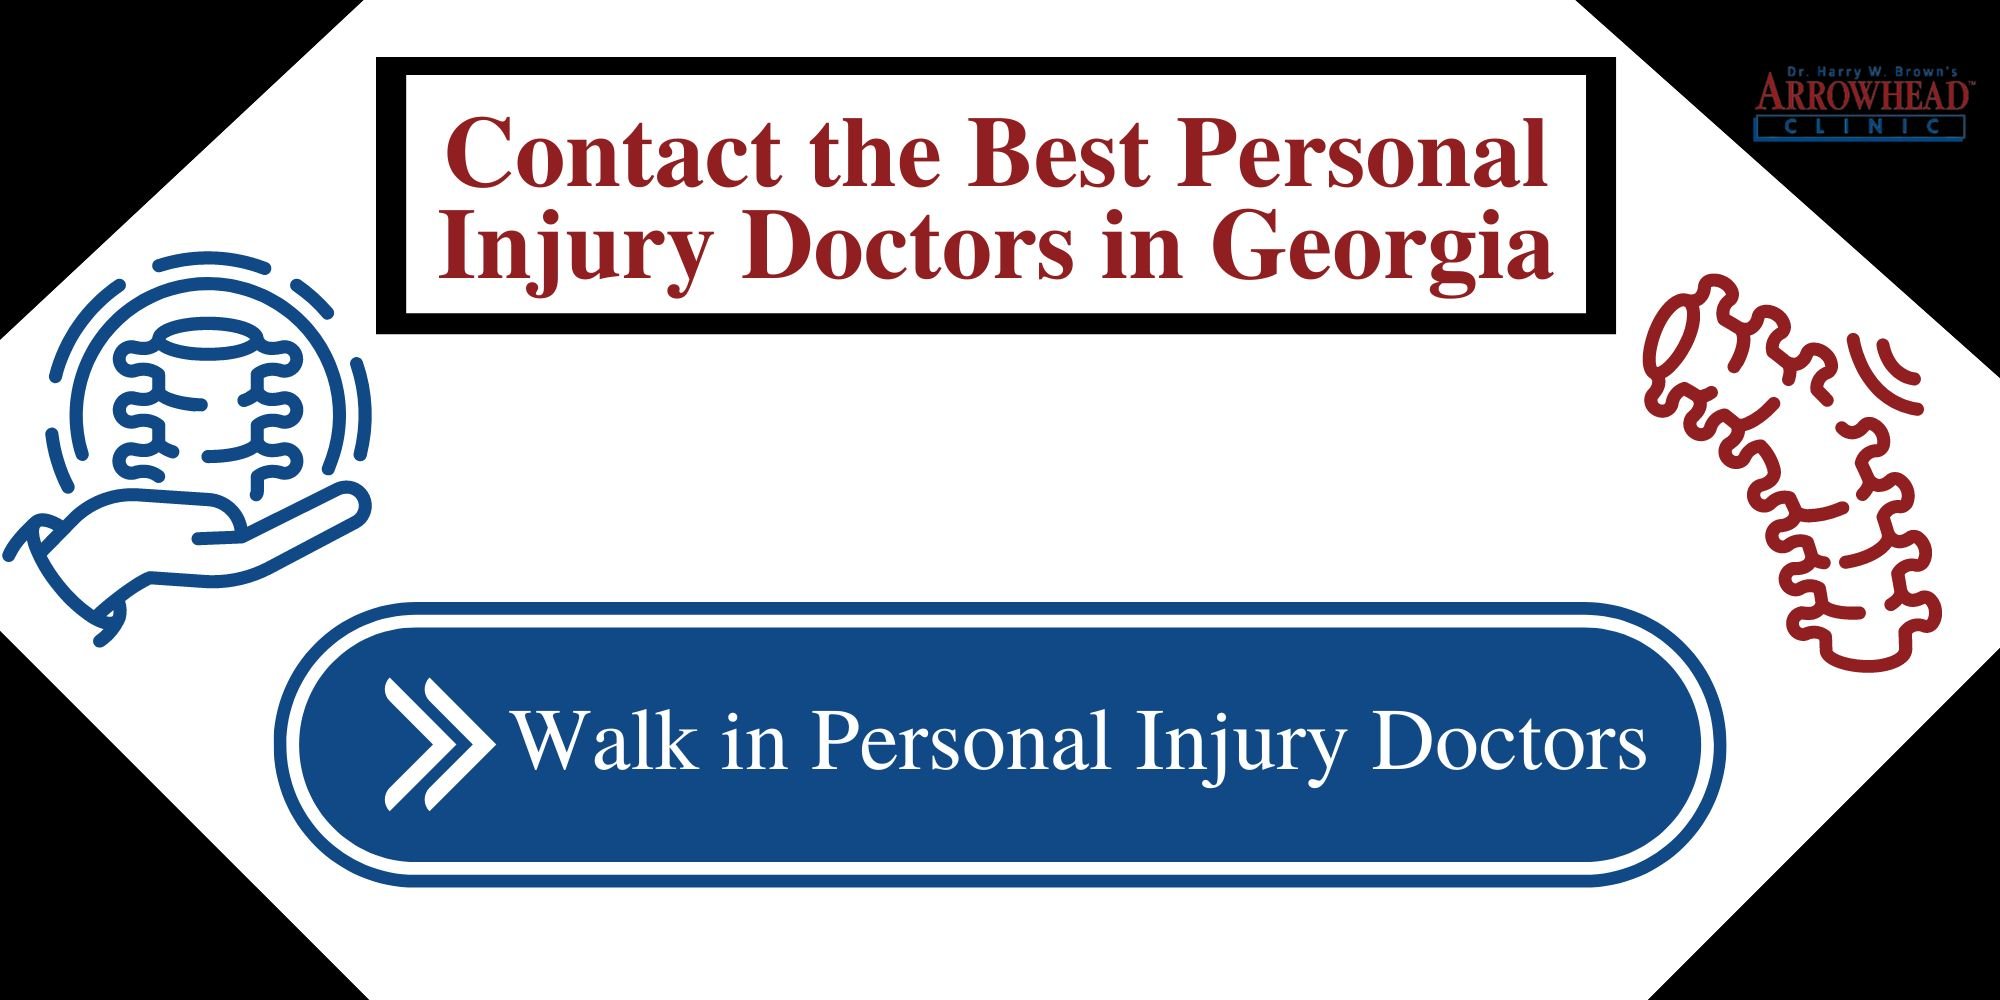 Contact-the-Best-Personal-Injury-Doctors-in-Georgia